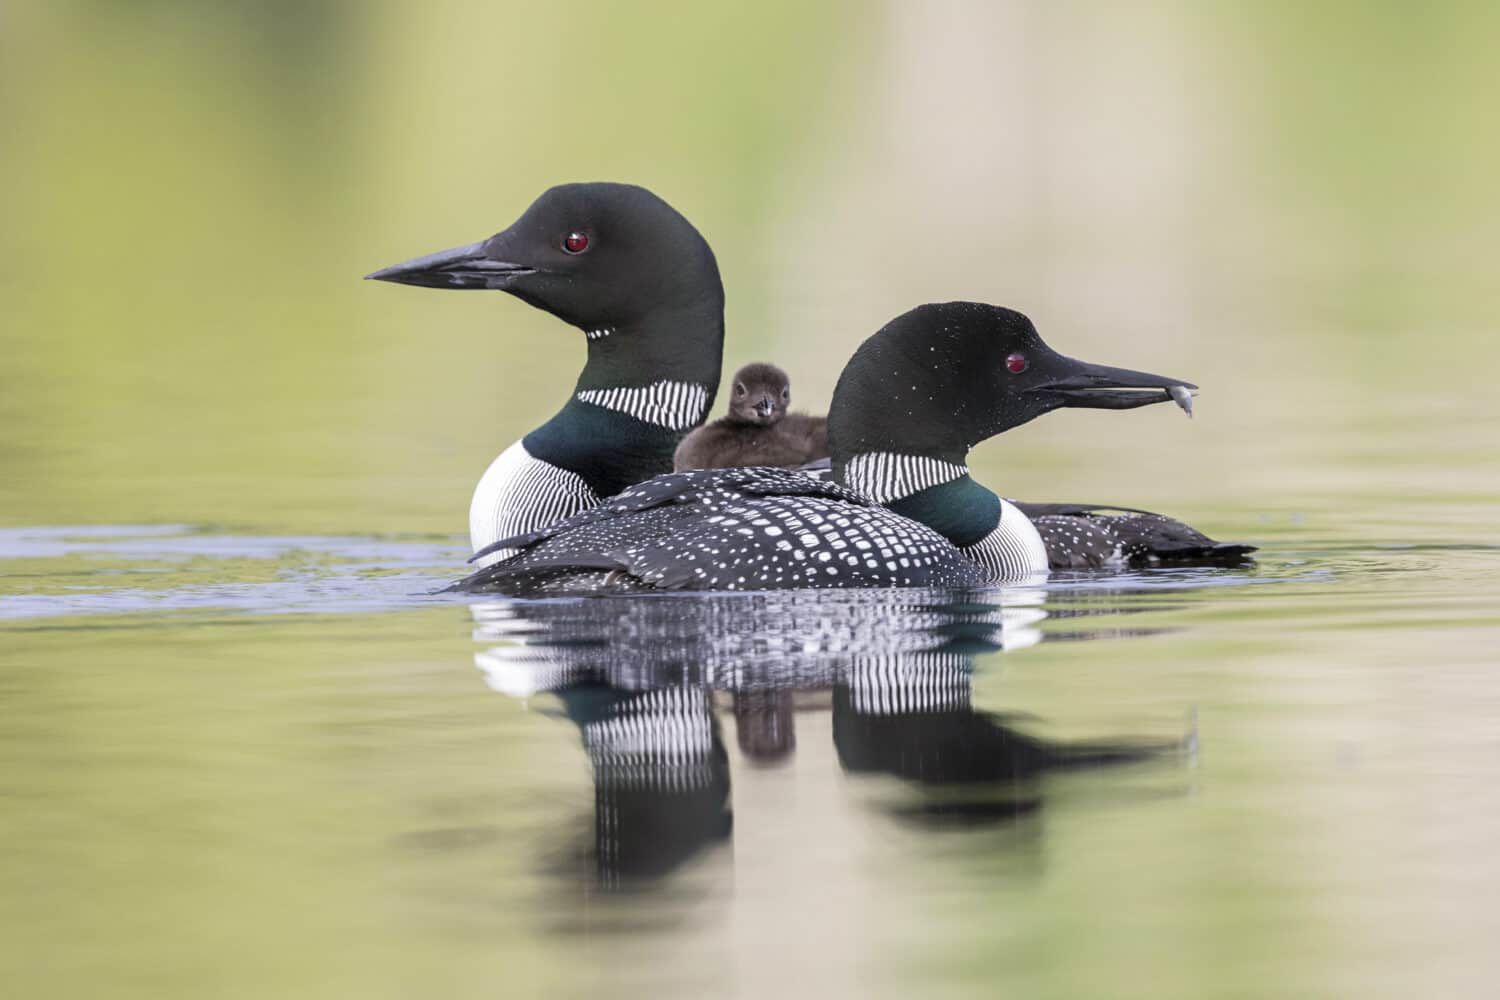 A week-old Common Loon chick (Gavia immer) rides on its mother's back as the father cruises past - Ontario, Canada